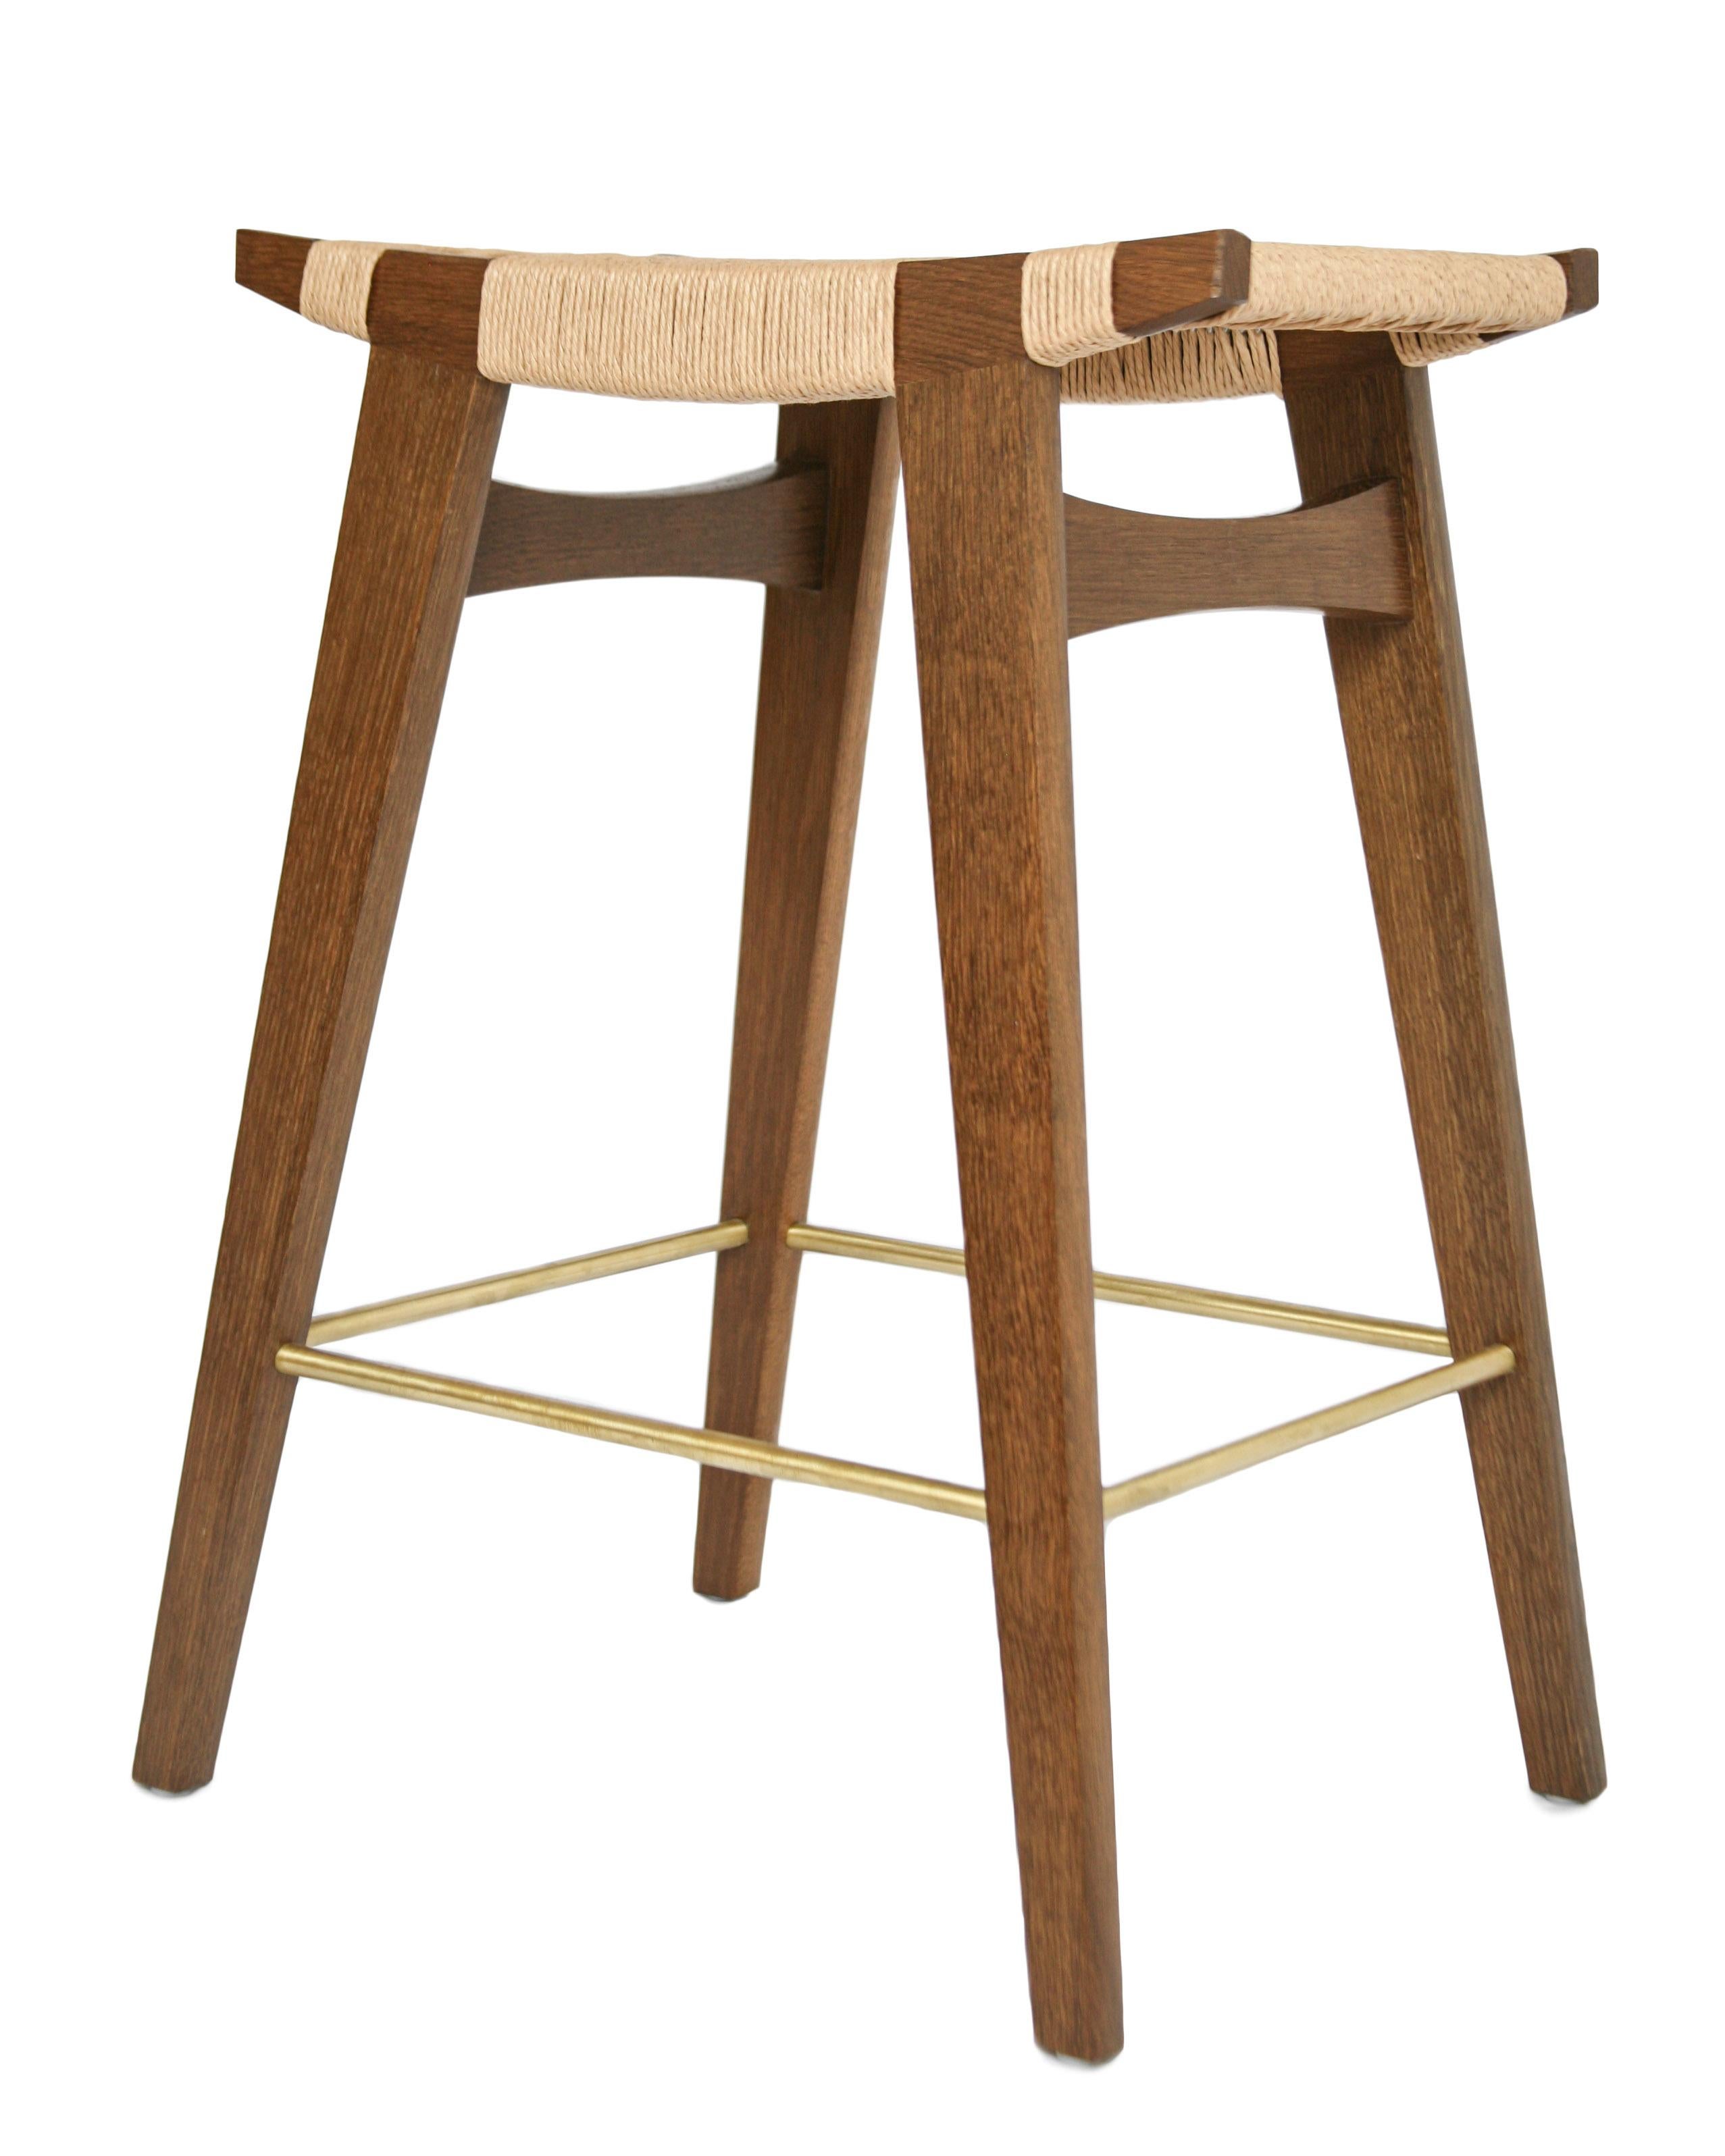 Our low-pi bar stool at 61cm (24